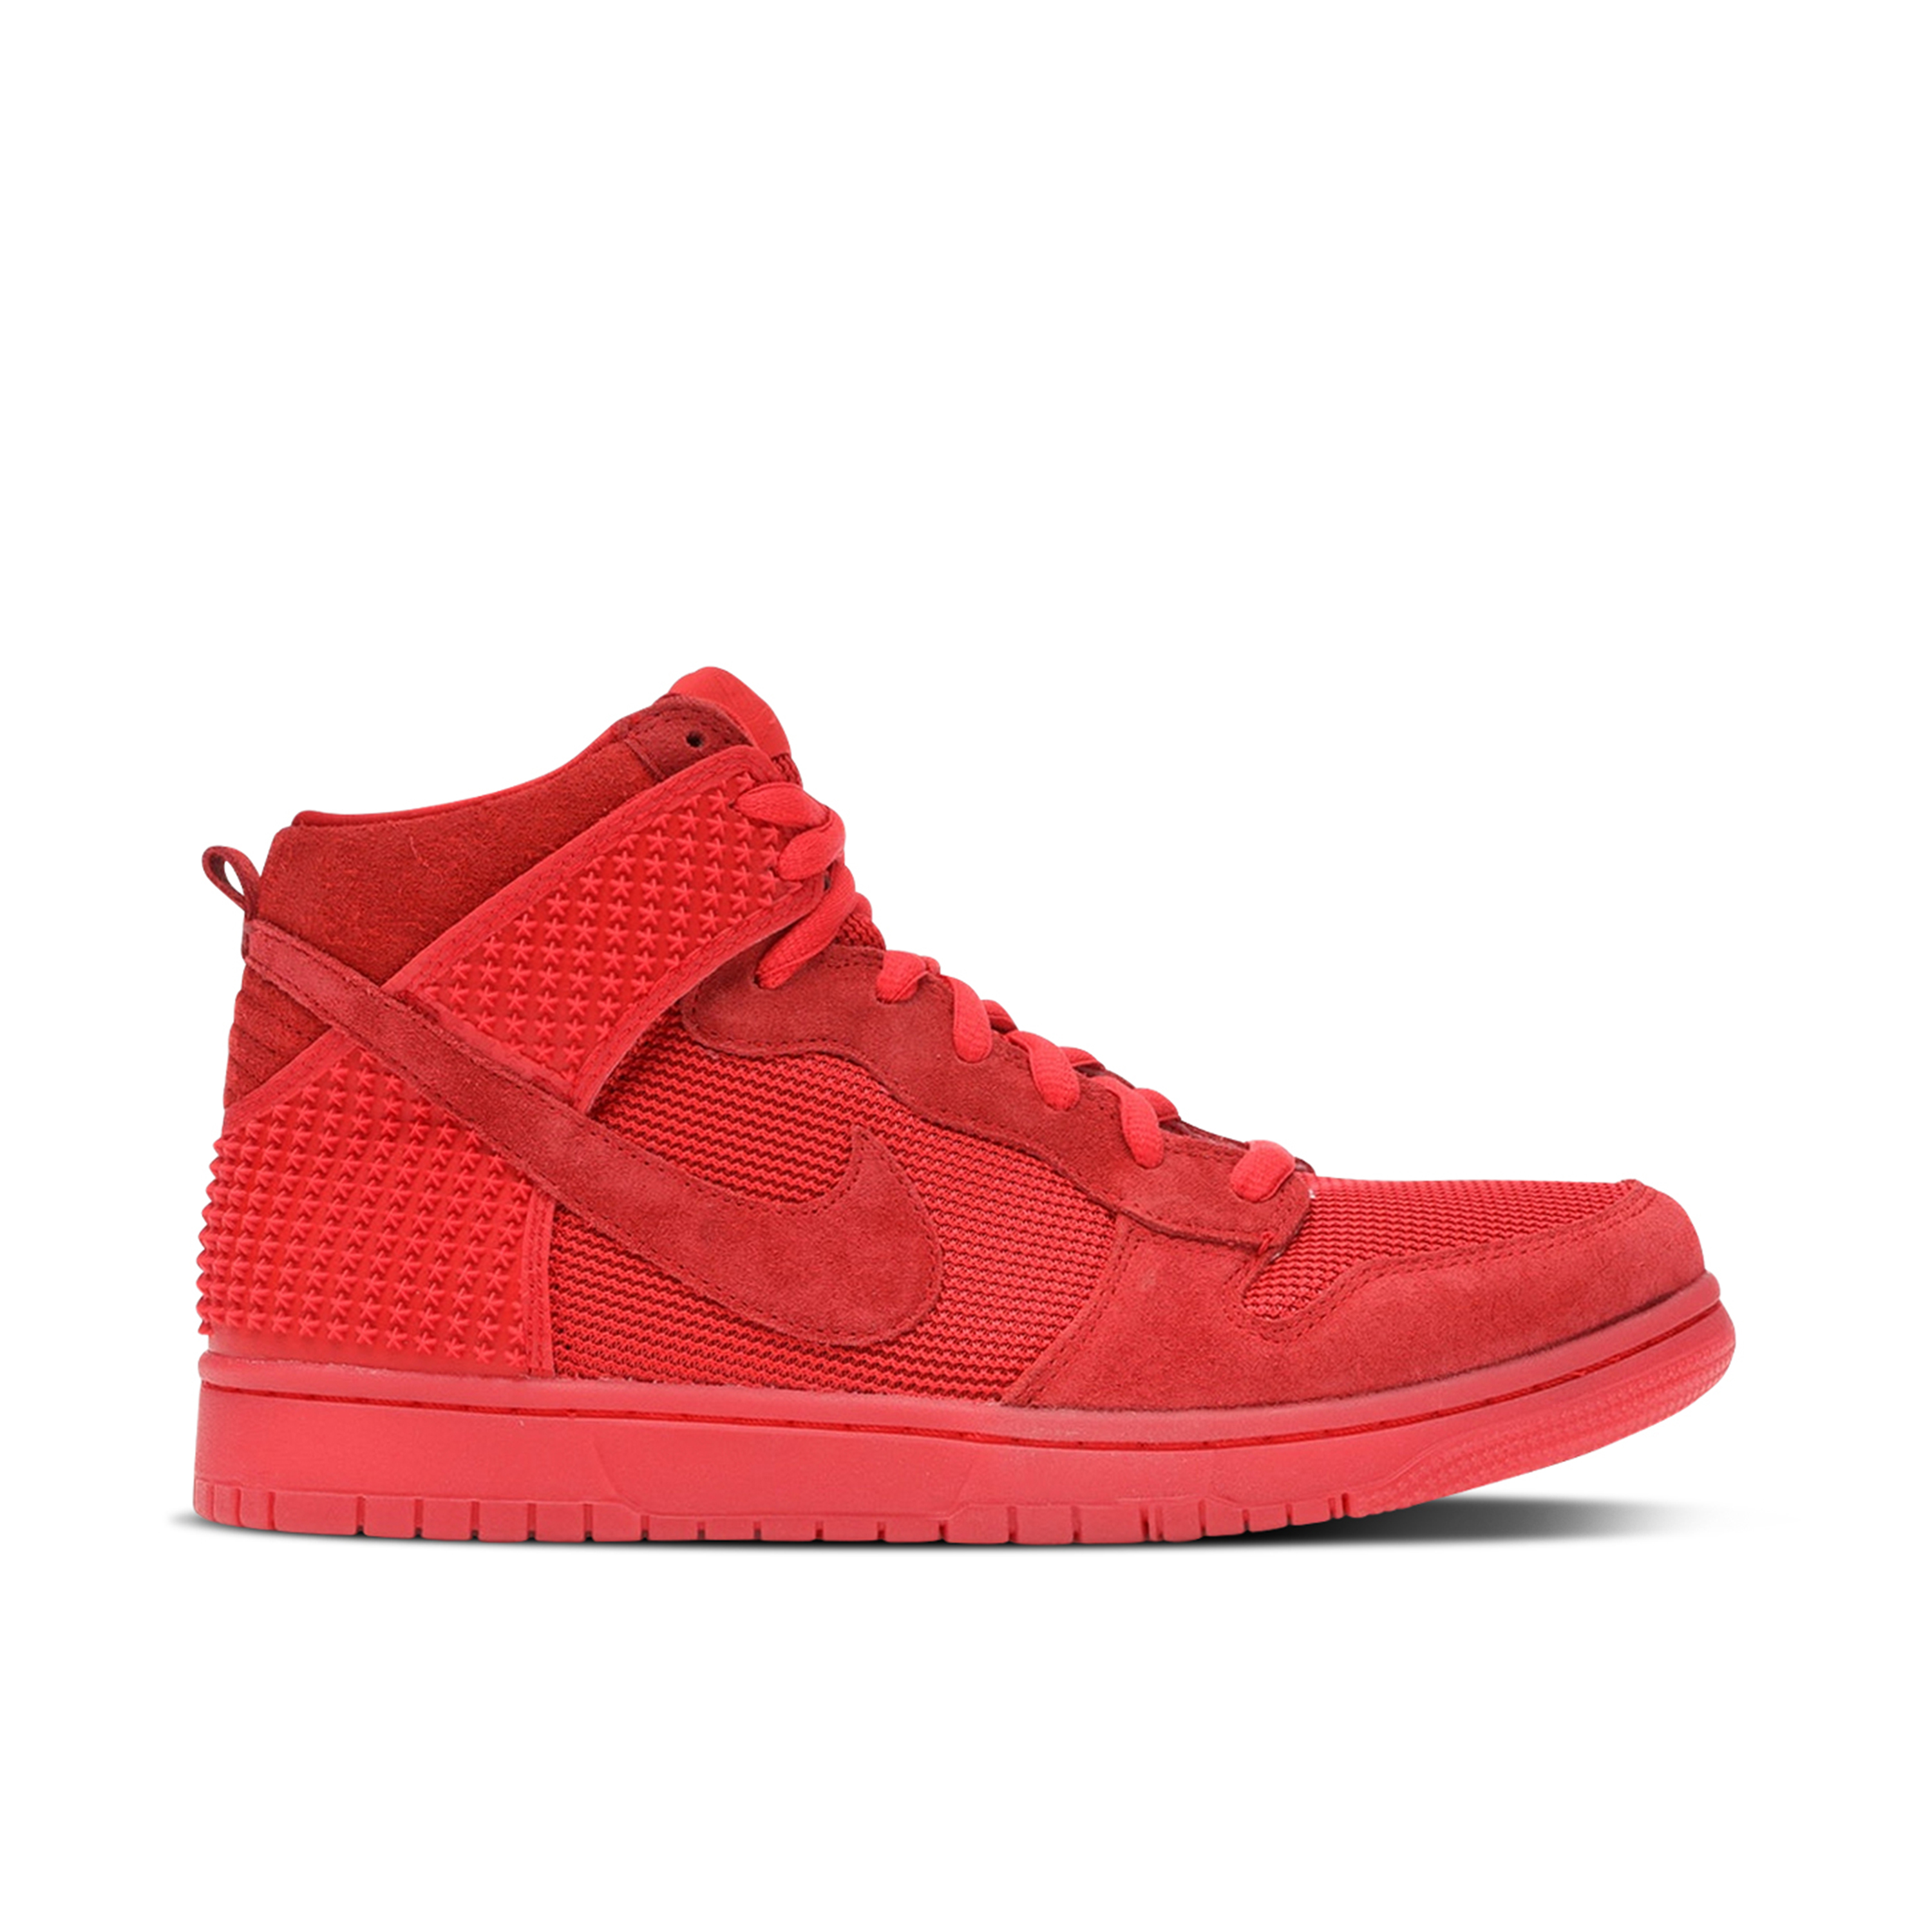 Air Yeezy 2 SP Red October | 508214-660 | Laced